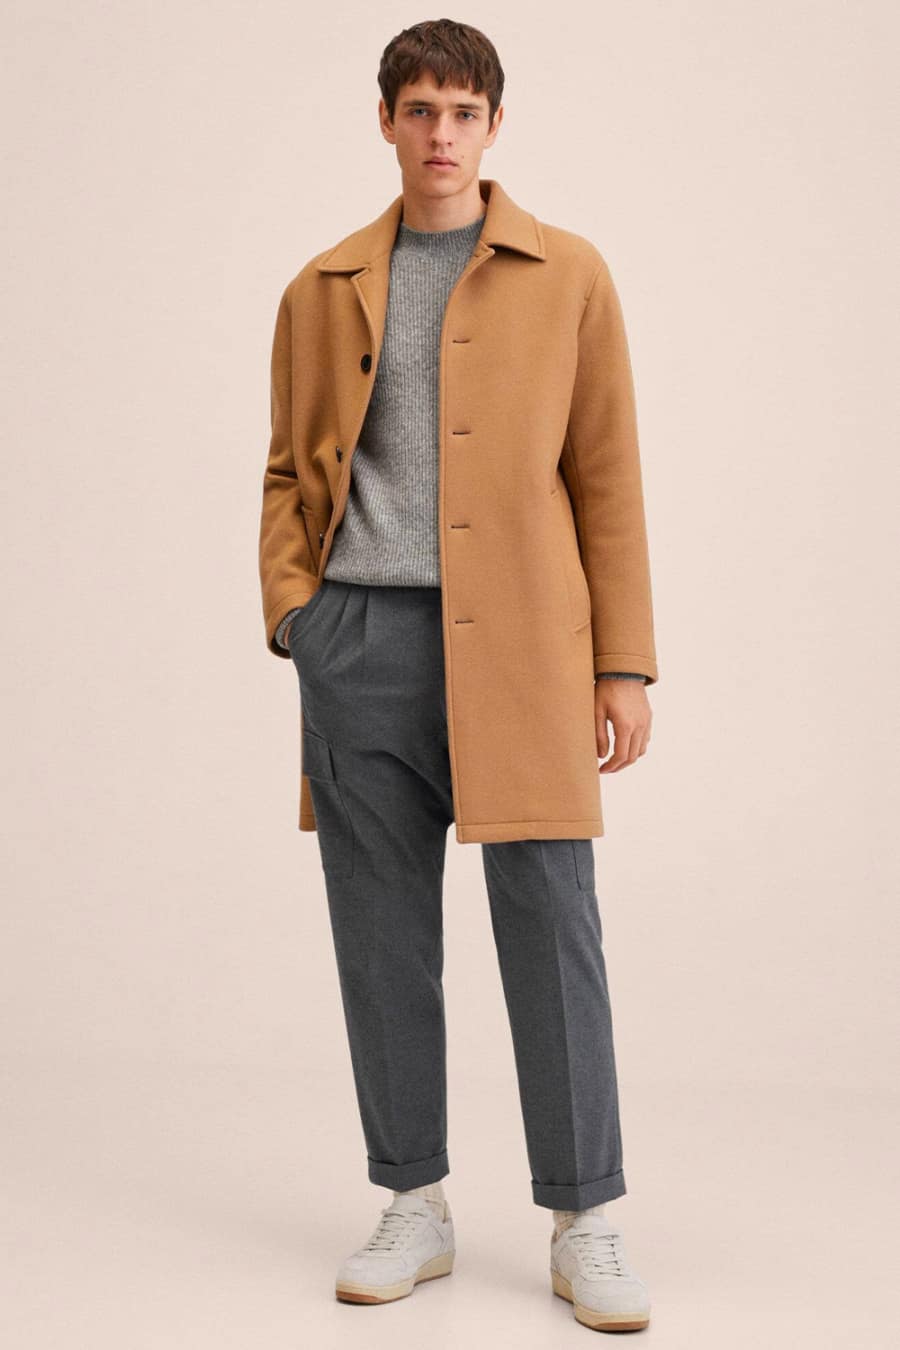 Grey trousers, jumper and sneakers with a camel overcoat outfit